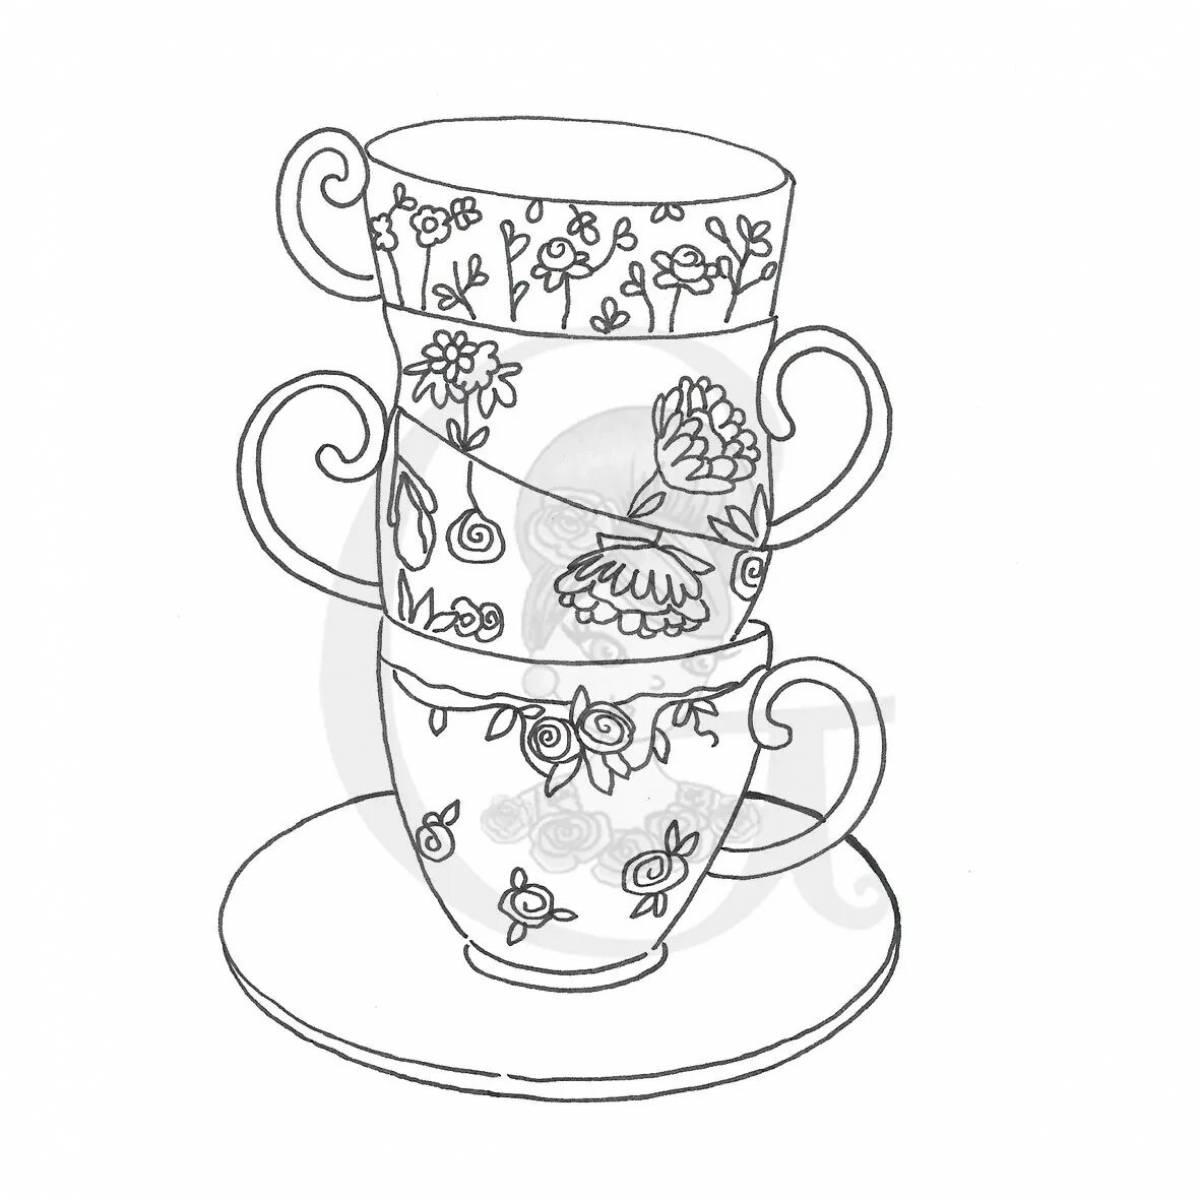 Coloring art mugs and cups